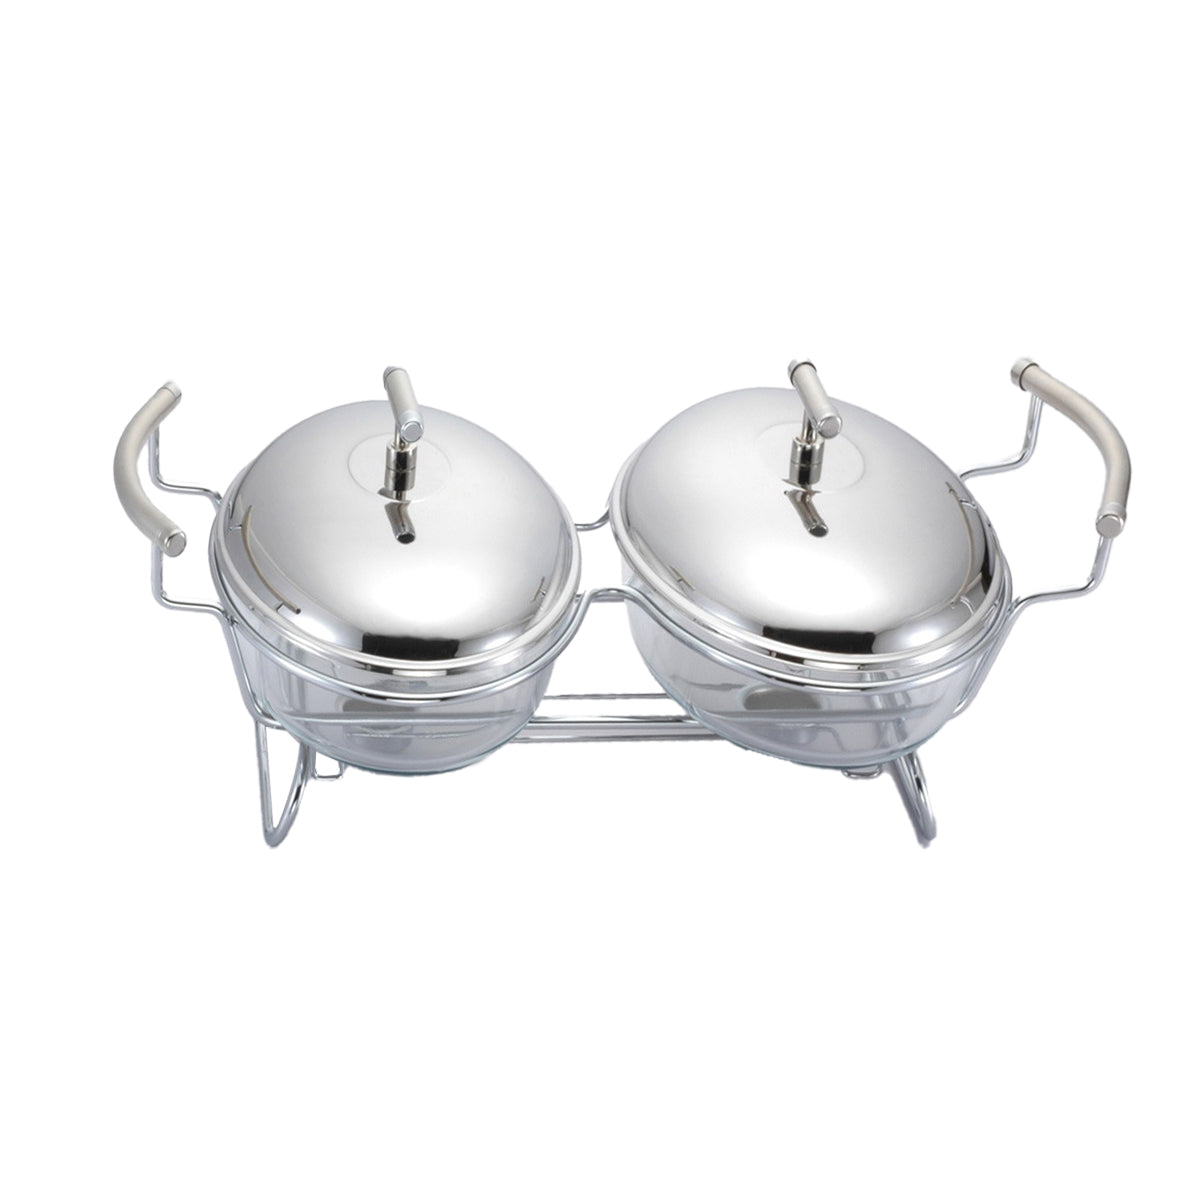 ﻿﻿2 Oval Food Warmers with Two Candles -2x3.0 Lit. -Stainless Steel 18/10 & Tempered Glass